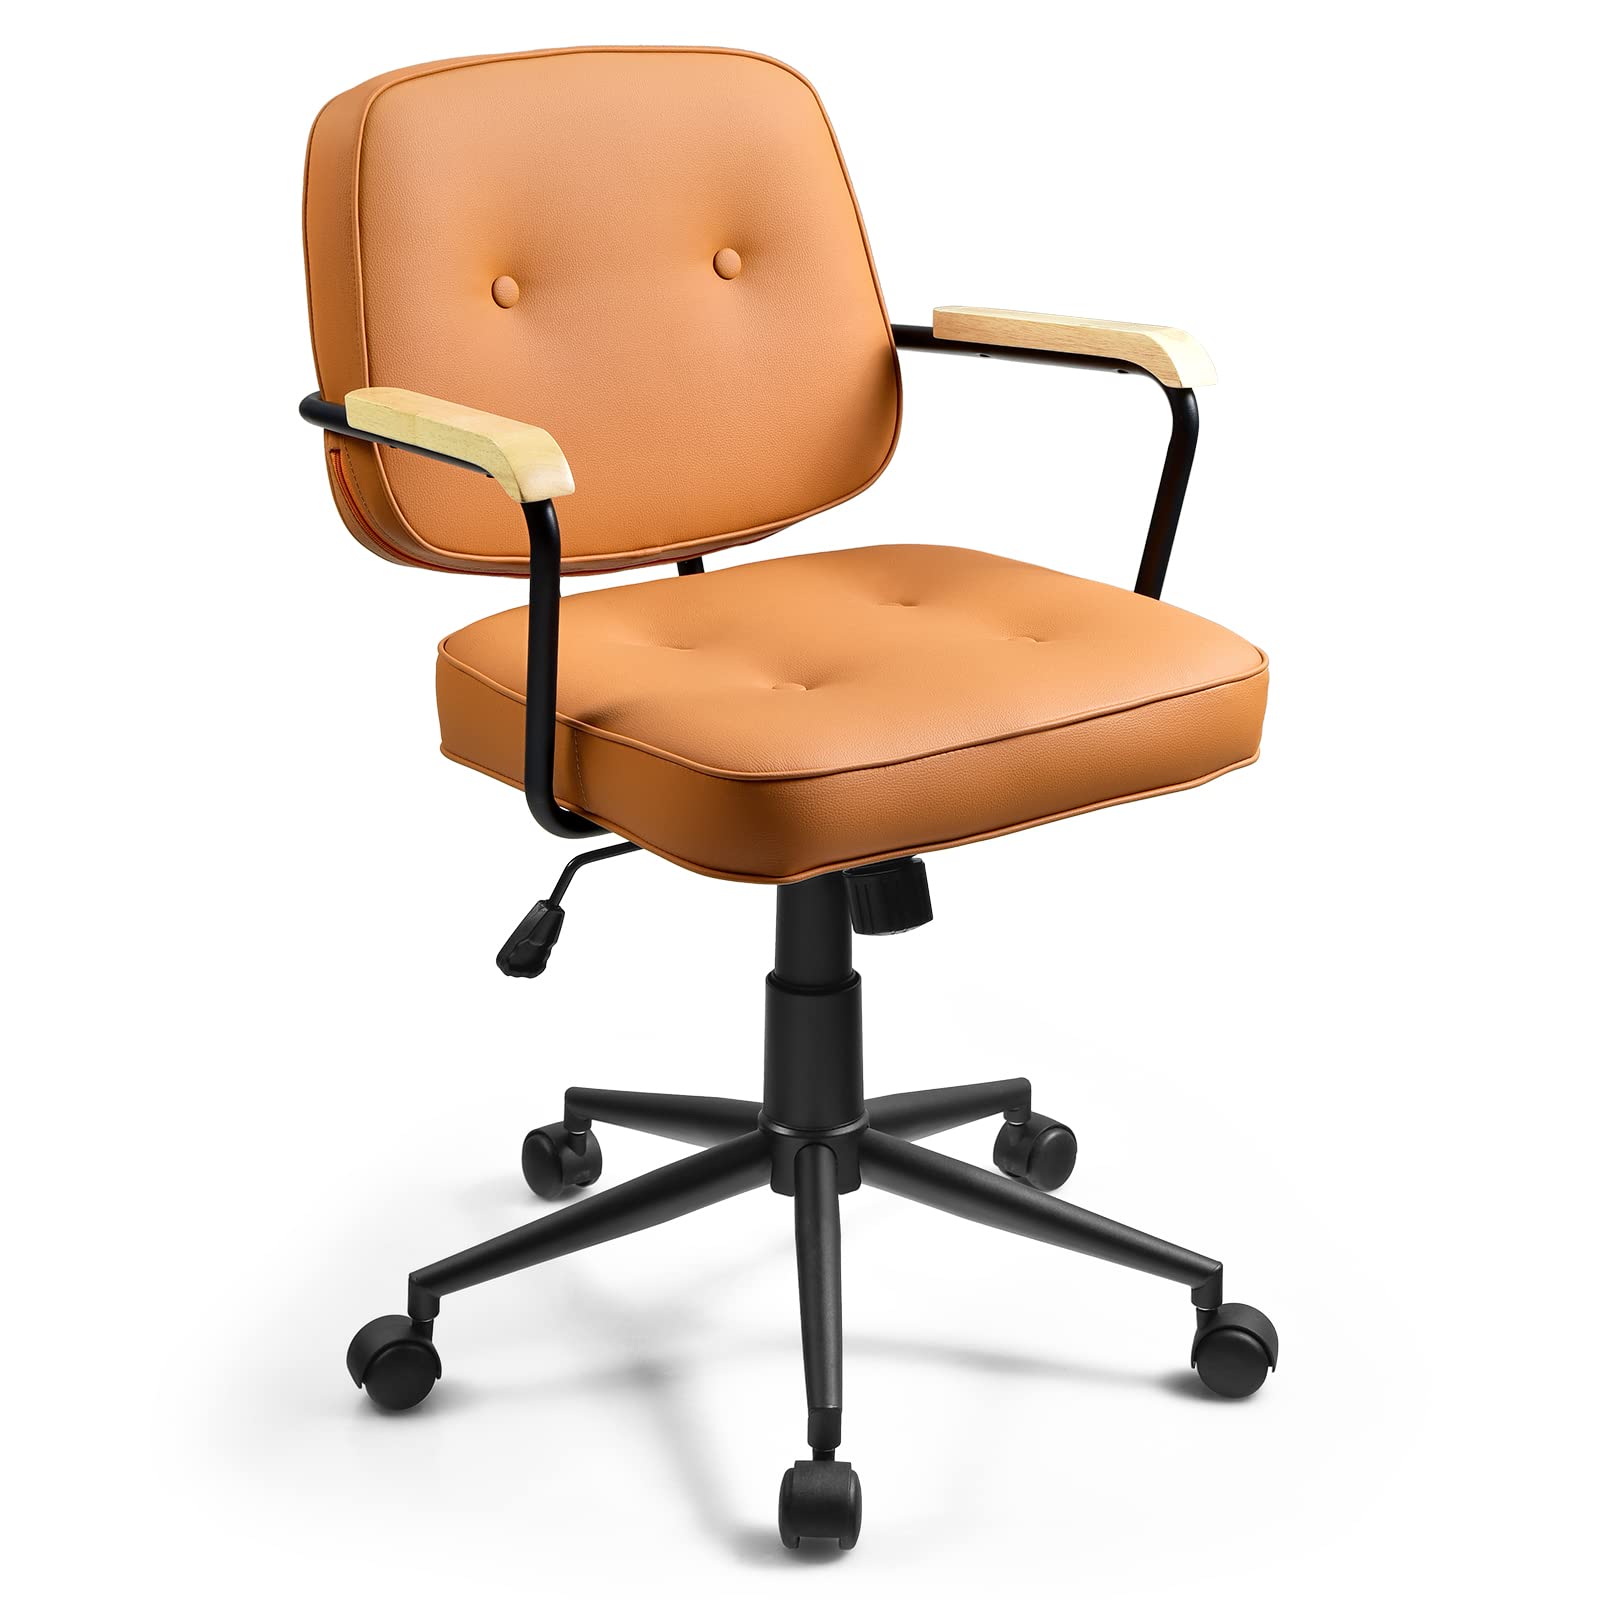 Giantex Home Office Chair, Height Adjustable PU Leather Desk Chair w/Rocking Backrest, Orange